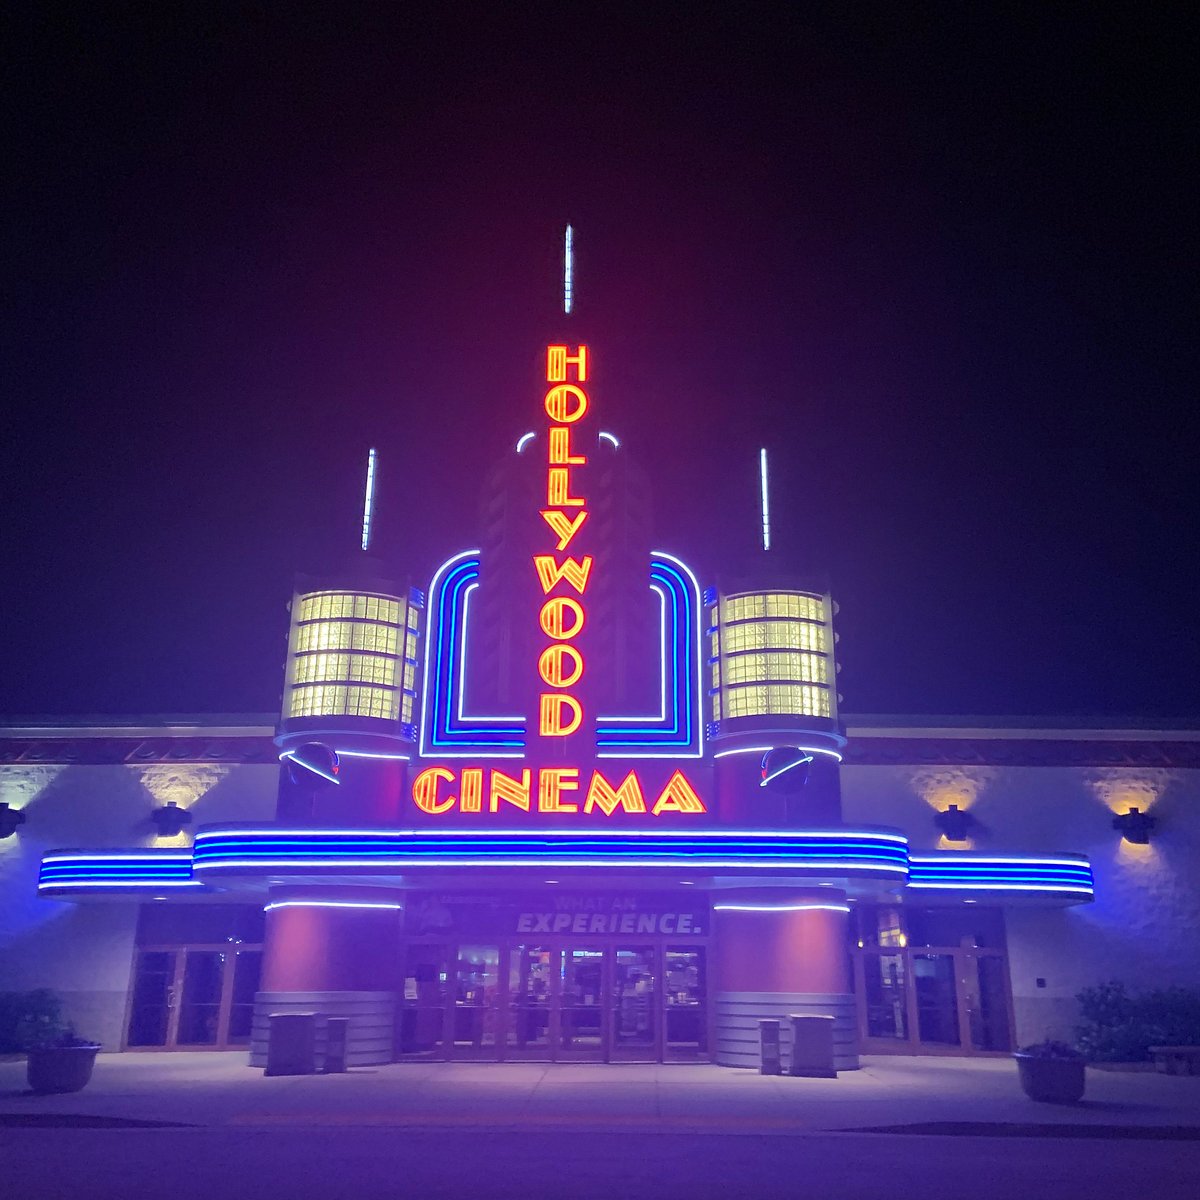 MARCUS HOLLYWOOD CINEMA GRAND CHUTE (Appleton) All You Need to Know